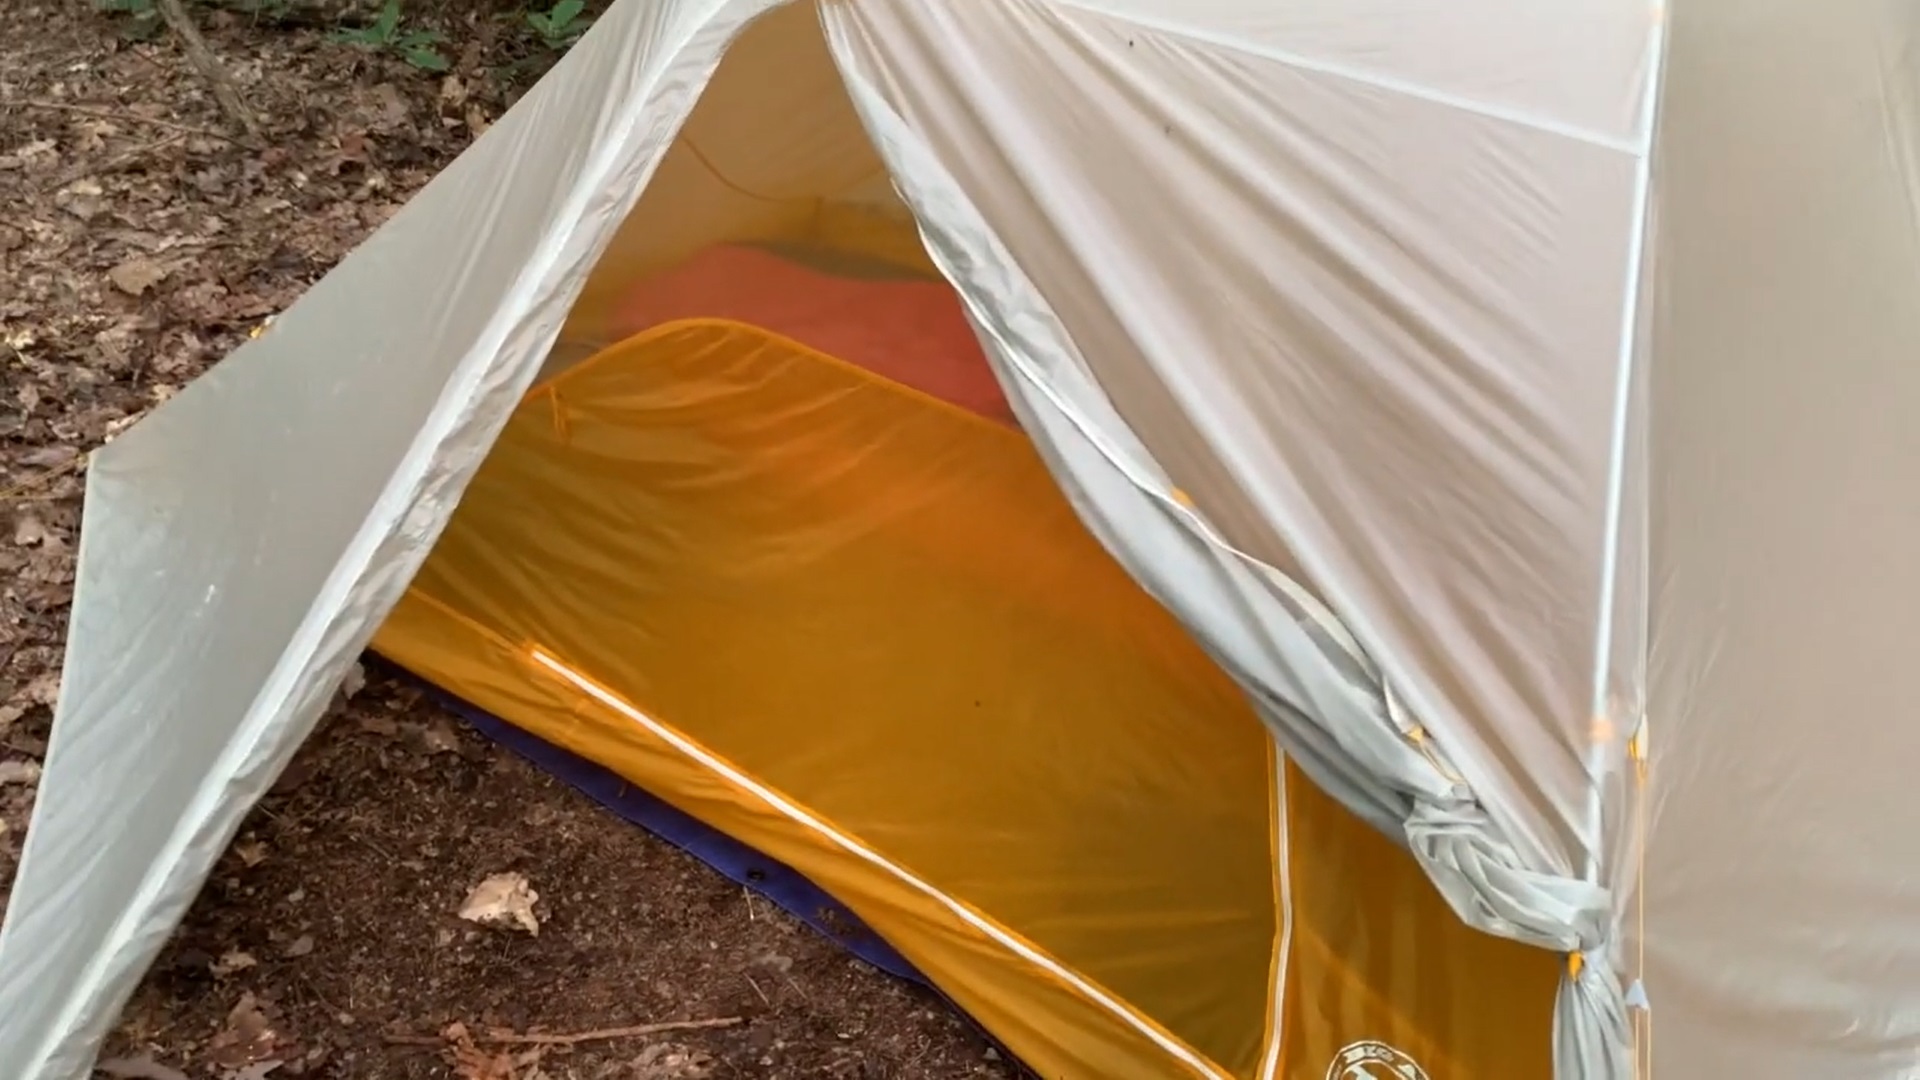 Big Agnes Tiger Wall UL3 SD Ultralight Backpacking Tent